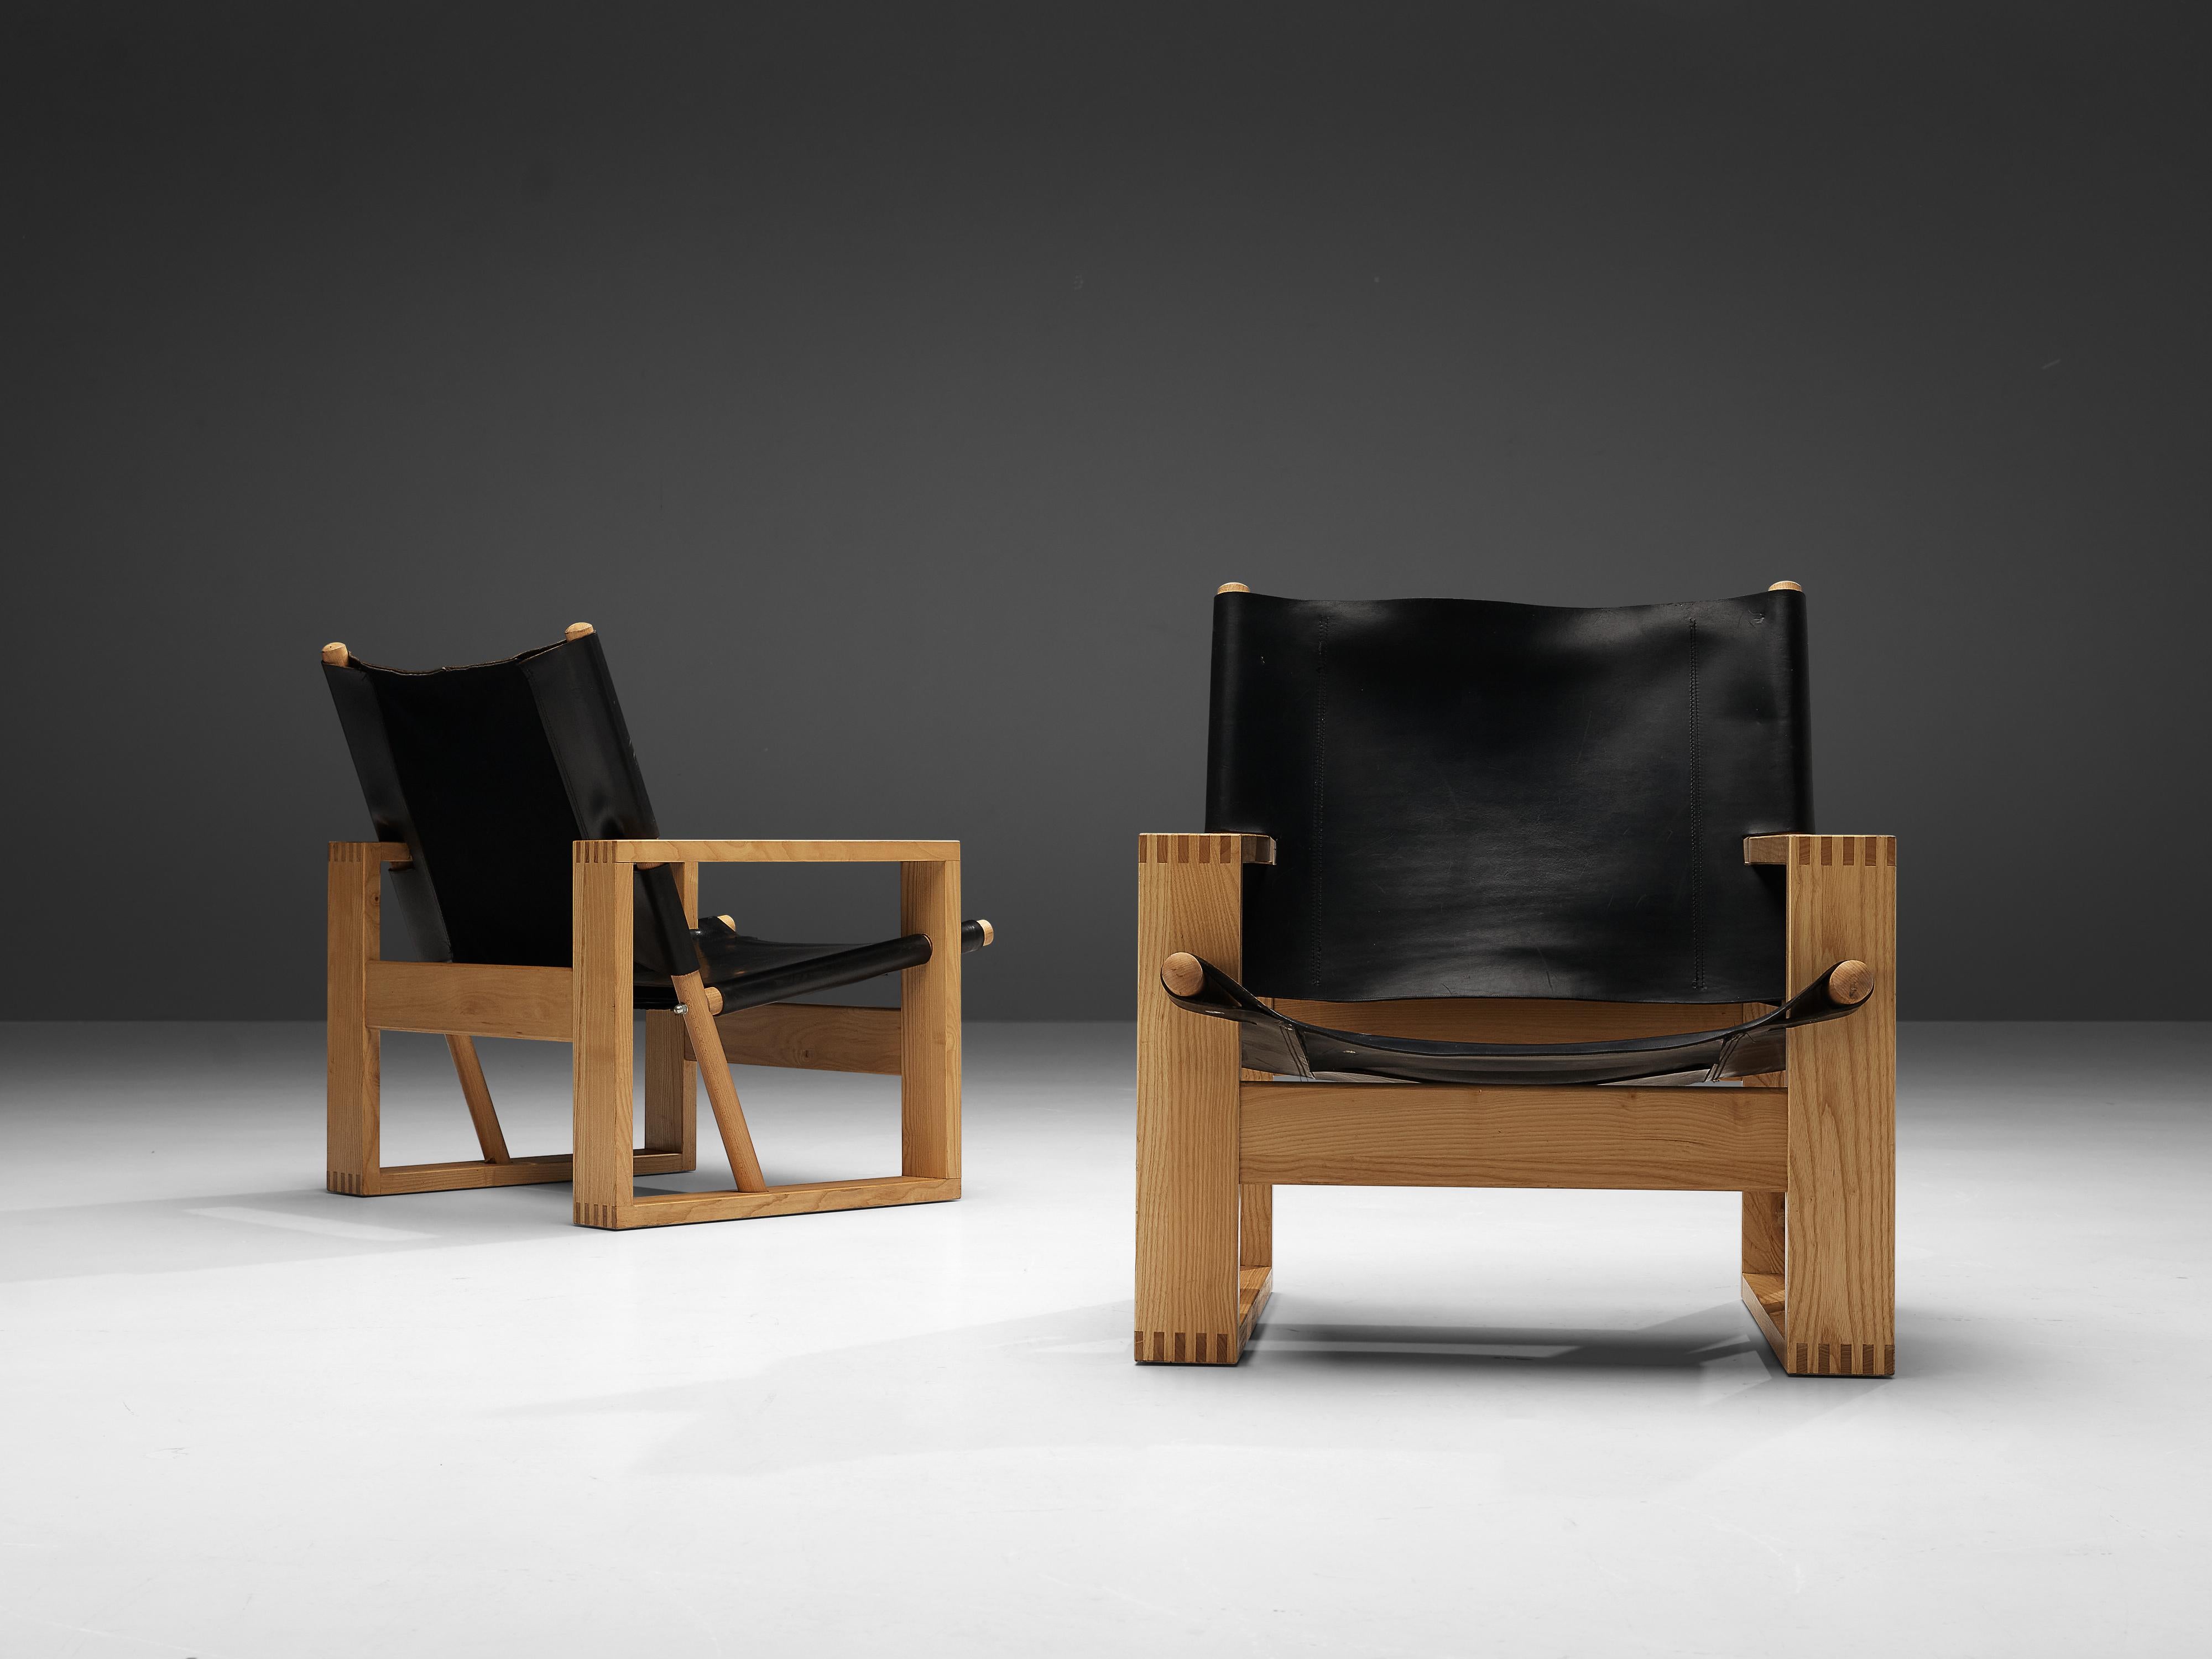 Ate van Apeldoorn for Houtwerk Hattem, pair of lounge chairs, ash, leather, The Netherlands, 1960s

The founder of Houtwerk Hattem, Ate van Apeldoorn, designed this lounge chair in the early 1960s. It features high-quality craftsmanship that can be